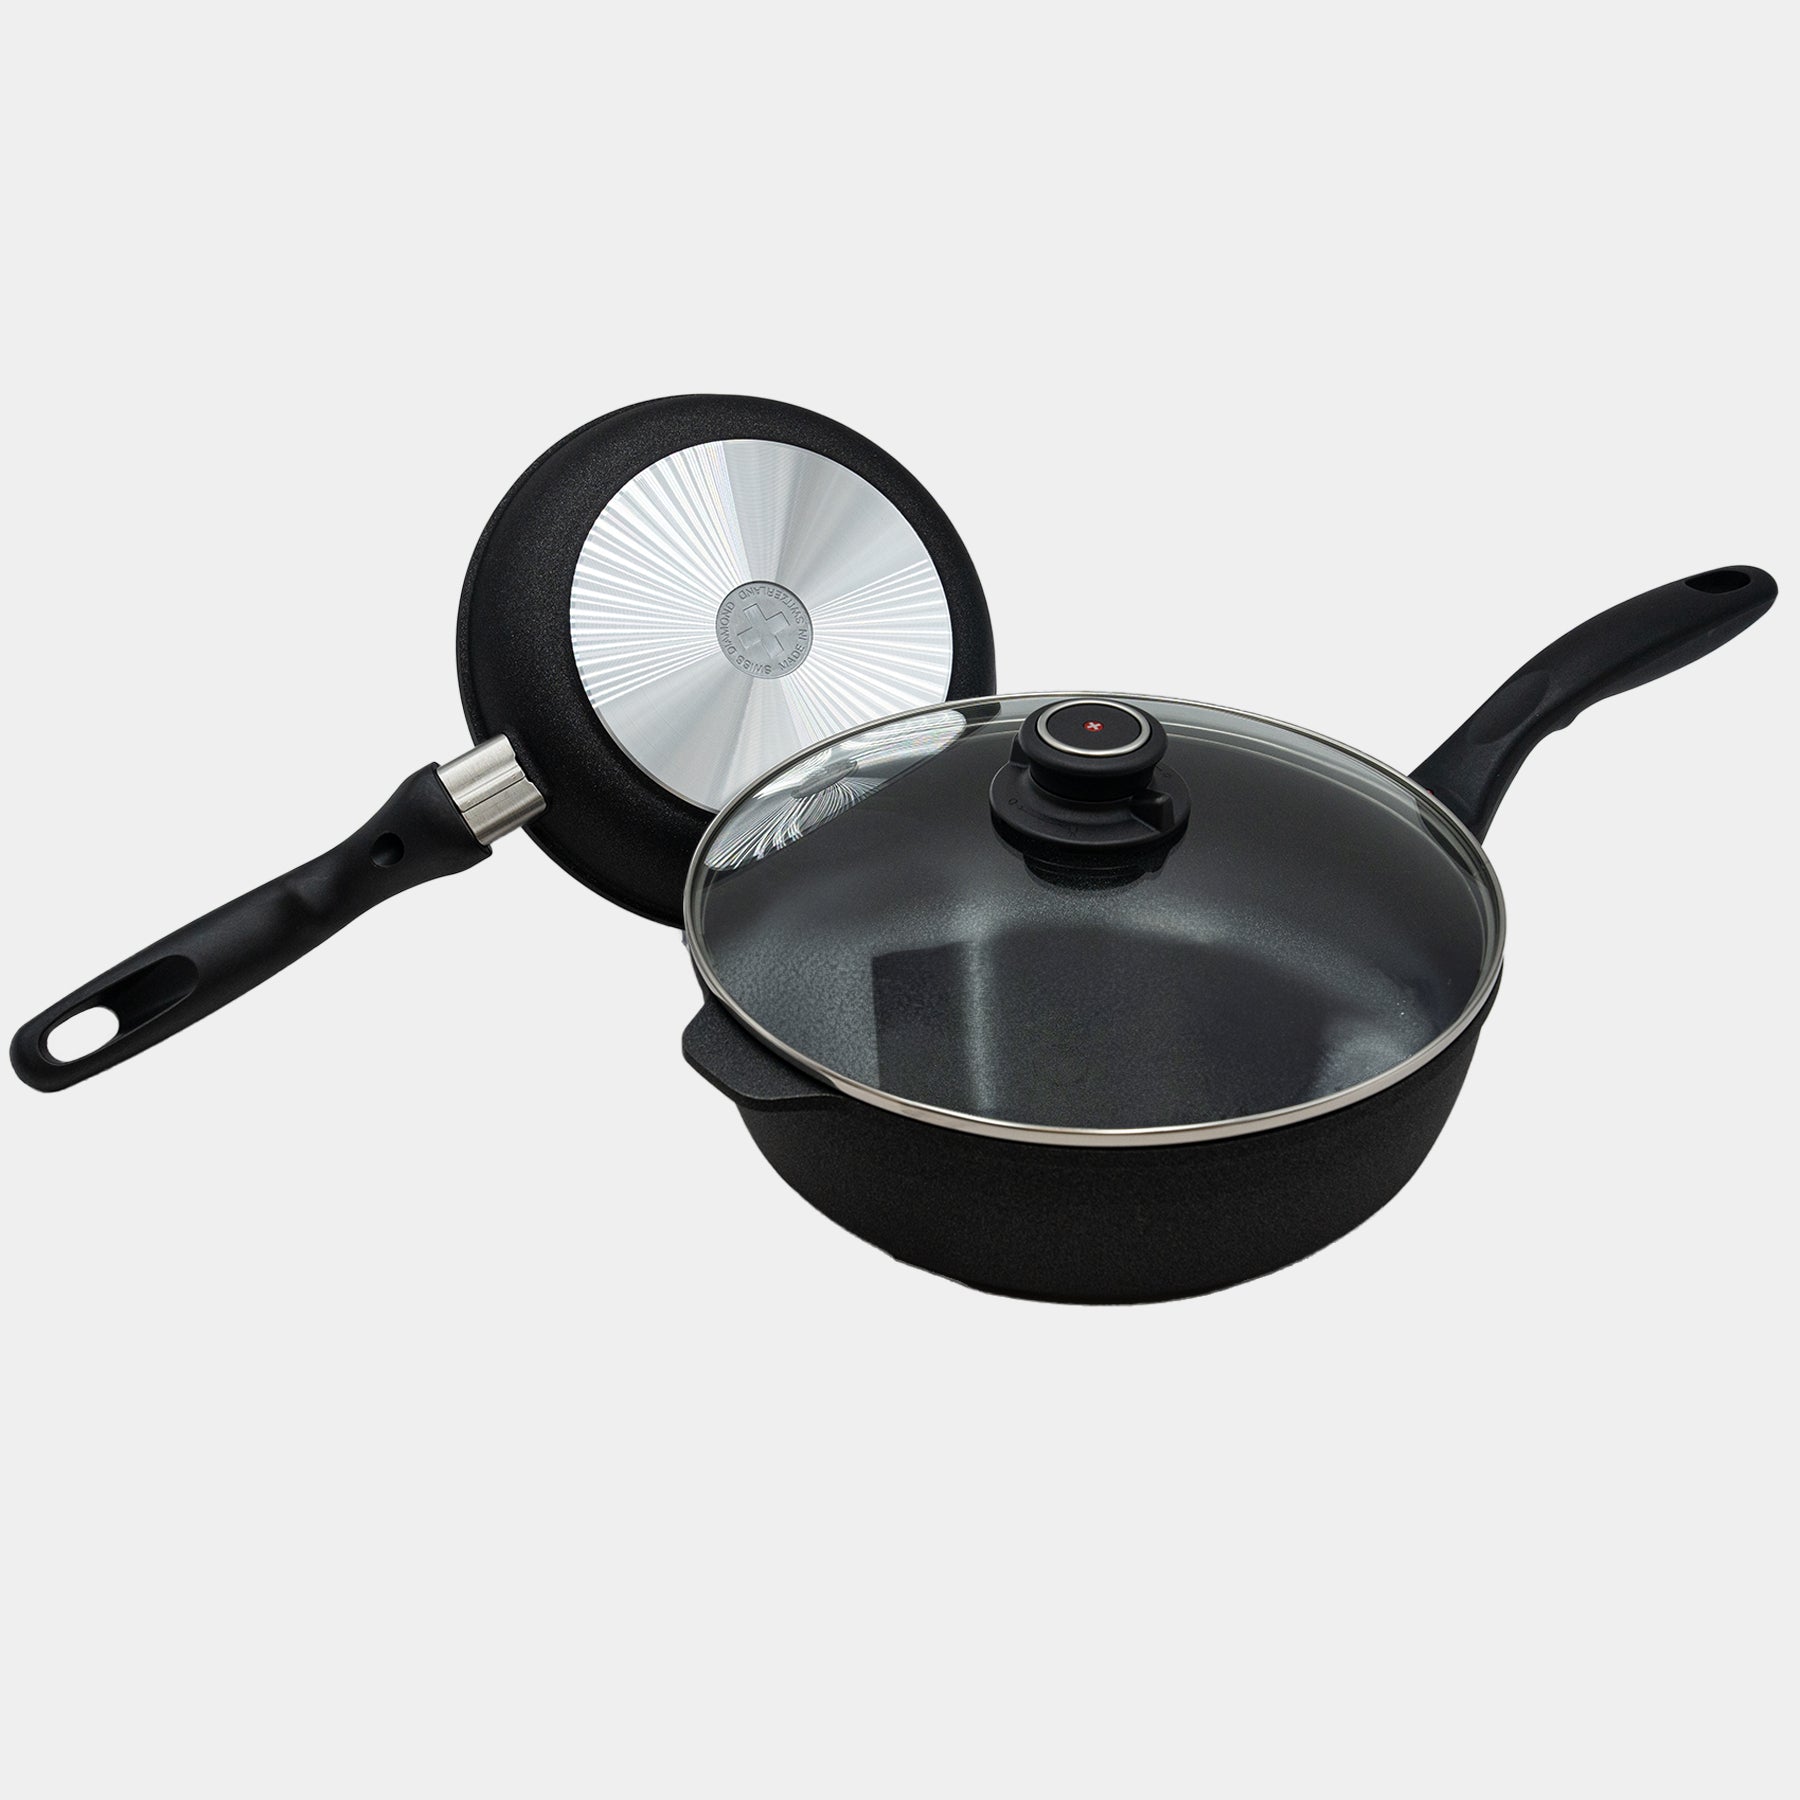 XD Nonstick 8" Fry Pan and 3.8 qt Saute Pan with Glass Lid Set angled with a flipped over pan showing bottom of pan